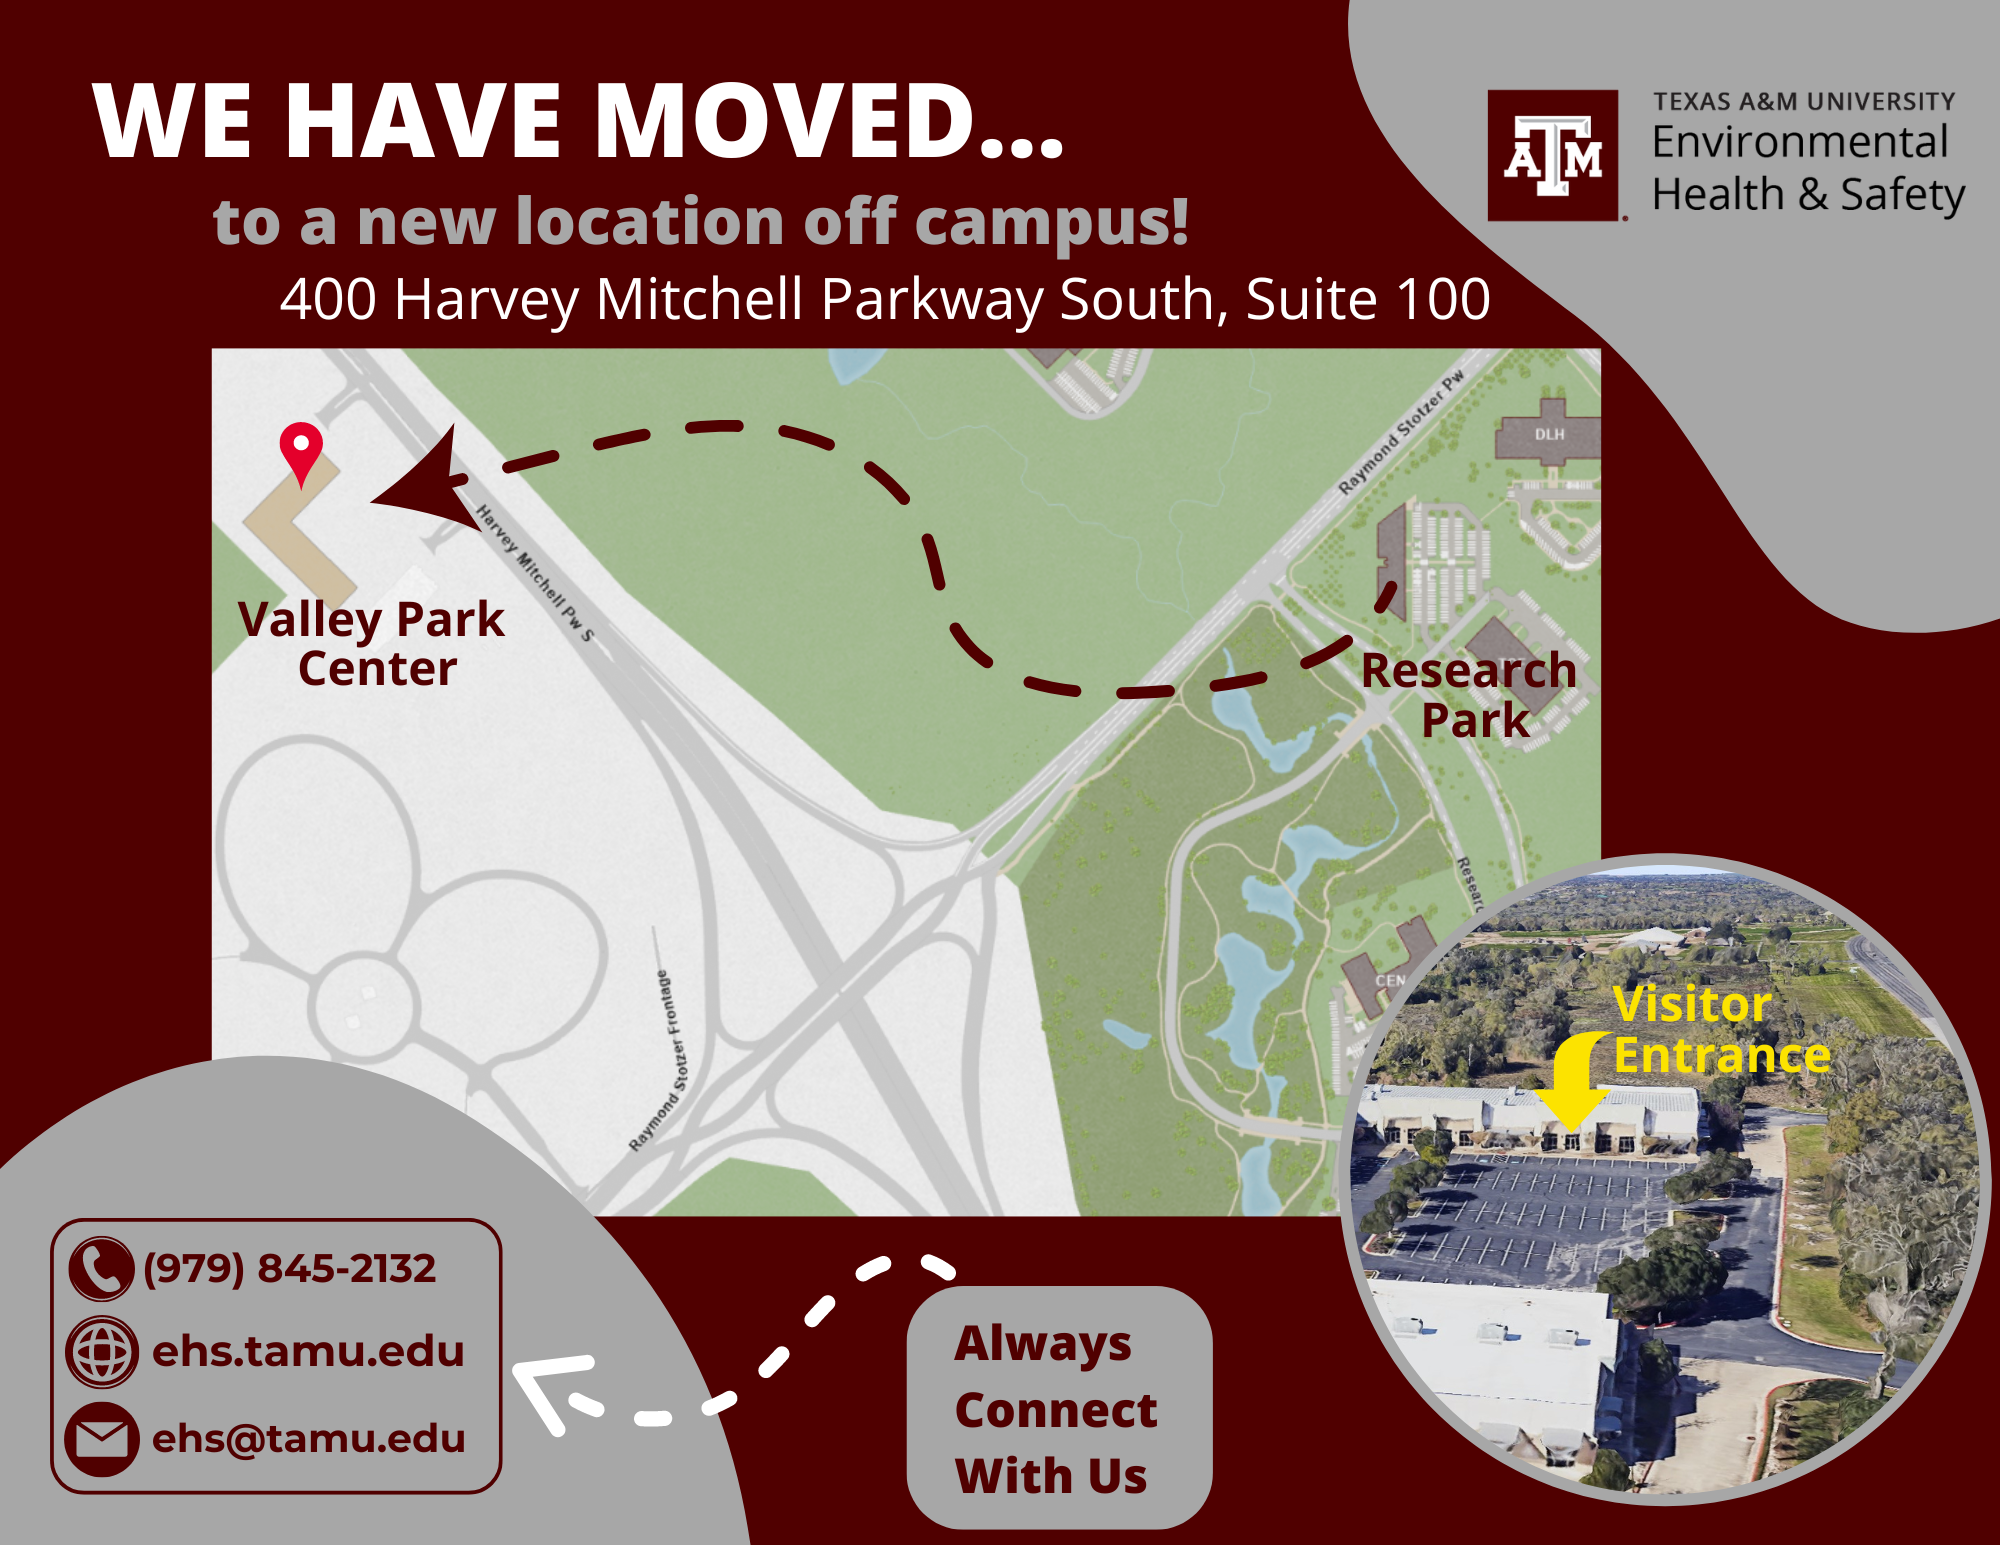 Map showing new physical location of EHS, including the visitor entrance. Lists phone number, email address and website. Always connect with us. Texas A&M University Environmental Health and Safety logo.